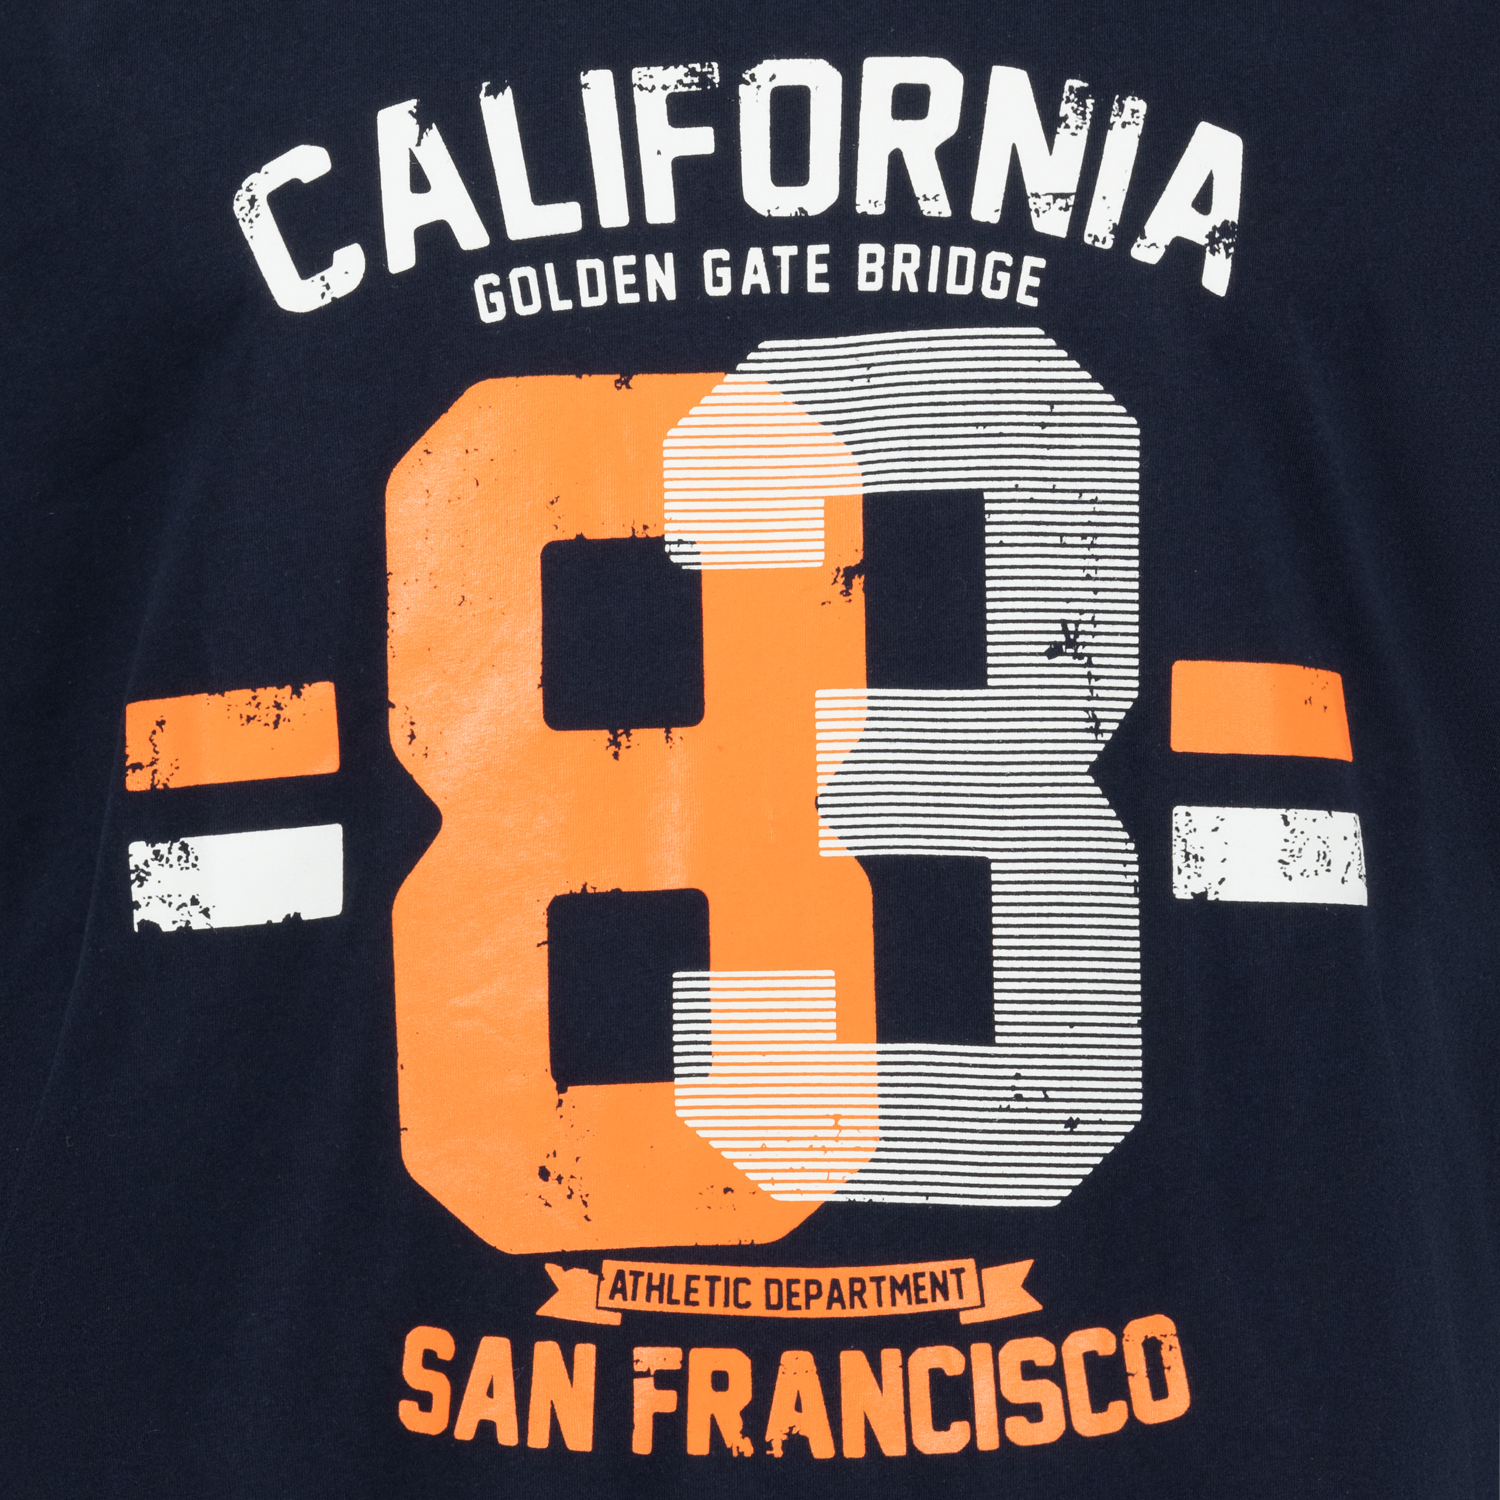 Printed muscle shirt by ADAMO navy in sizes 2XL-12XL series "Golden Gate" COMFORT FIT